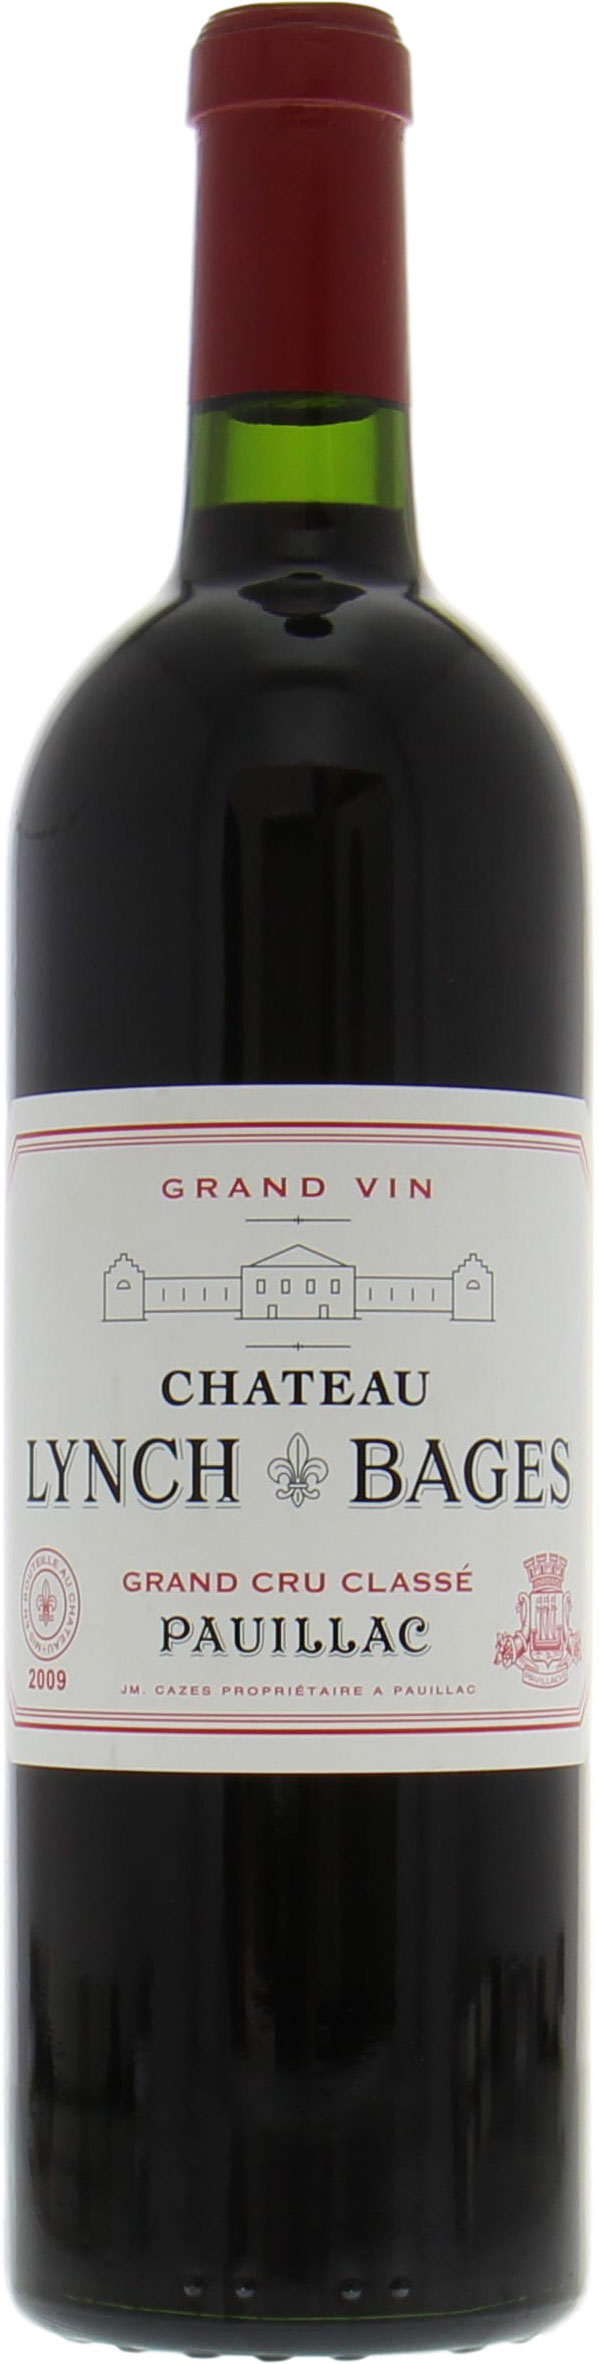 Chateau Lynch Bages - Chateau Lynch Bages 2009 From Original Wooden Case